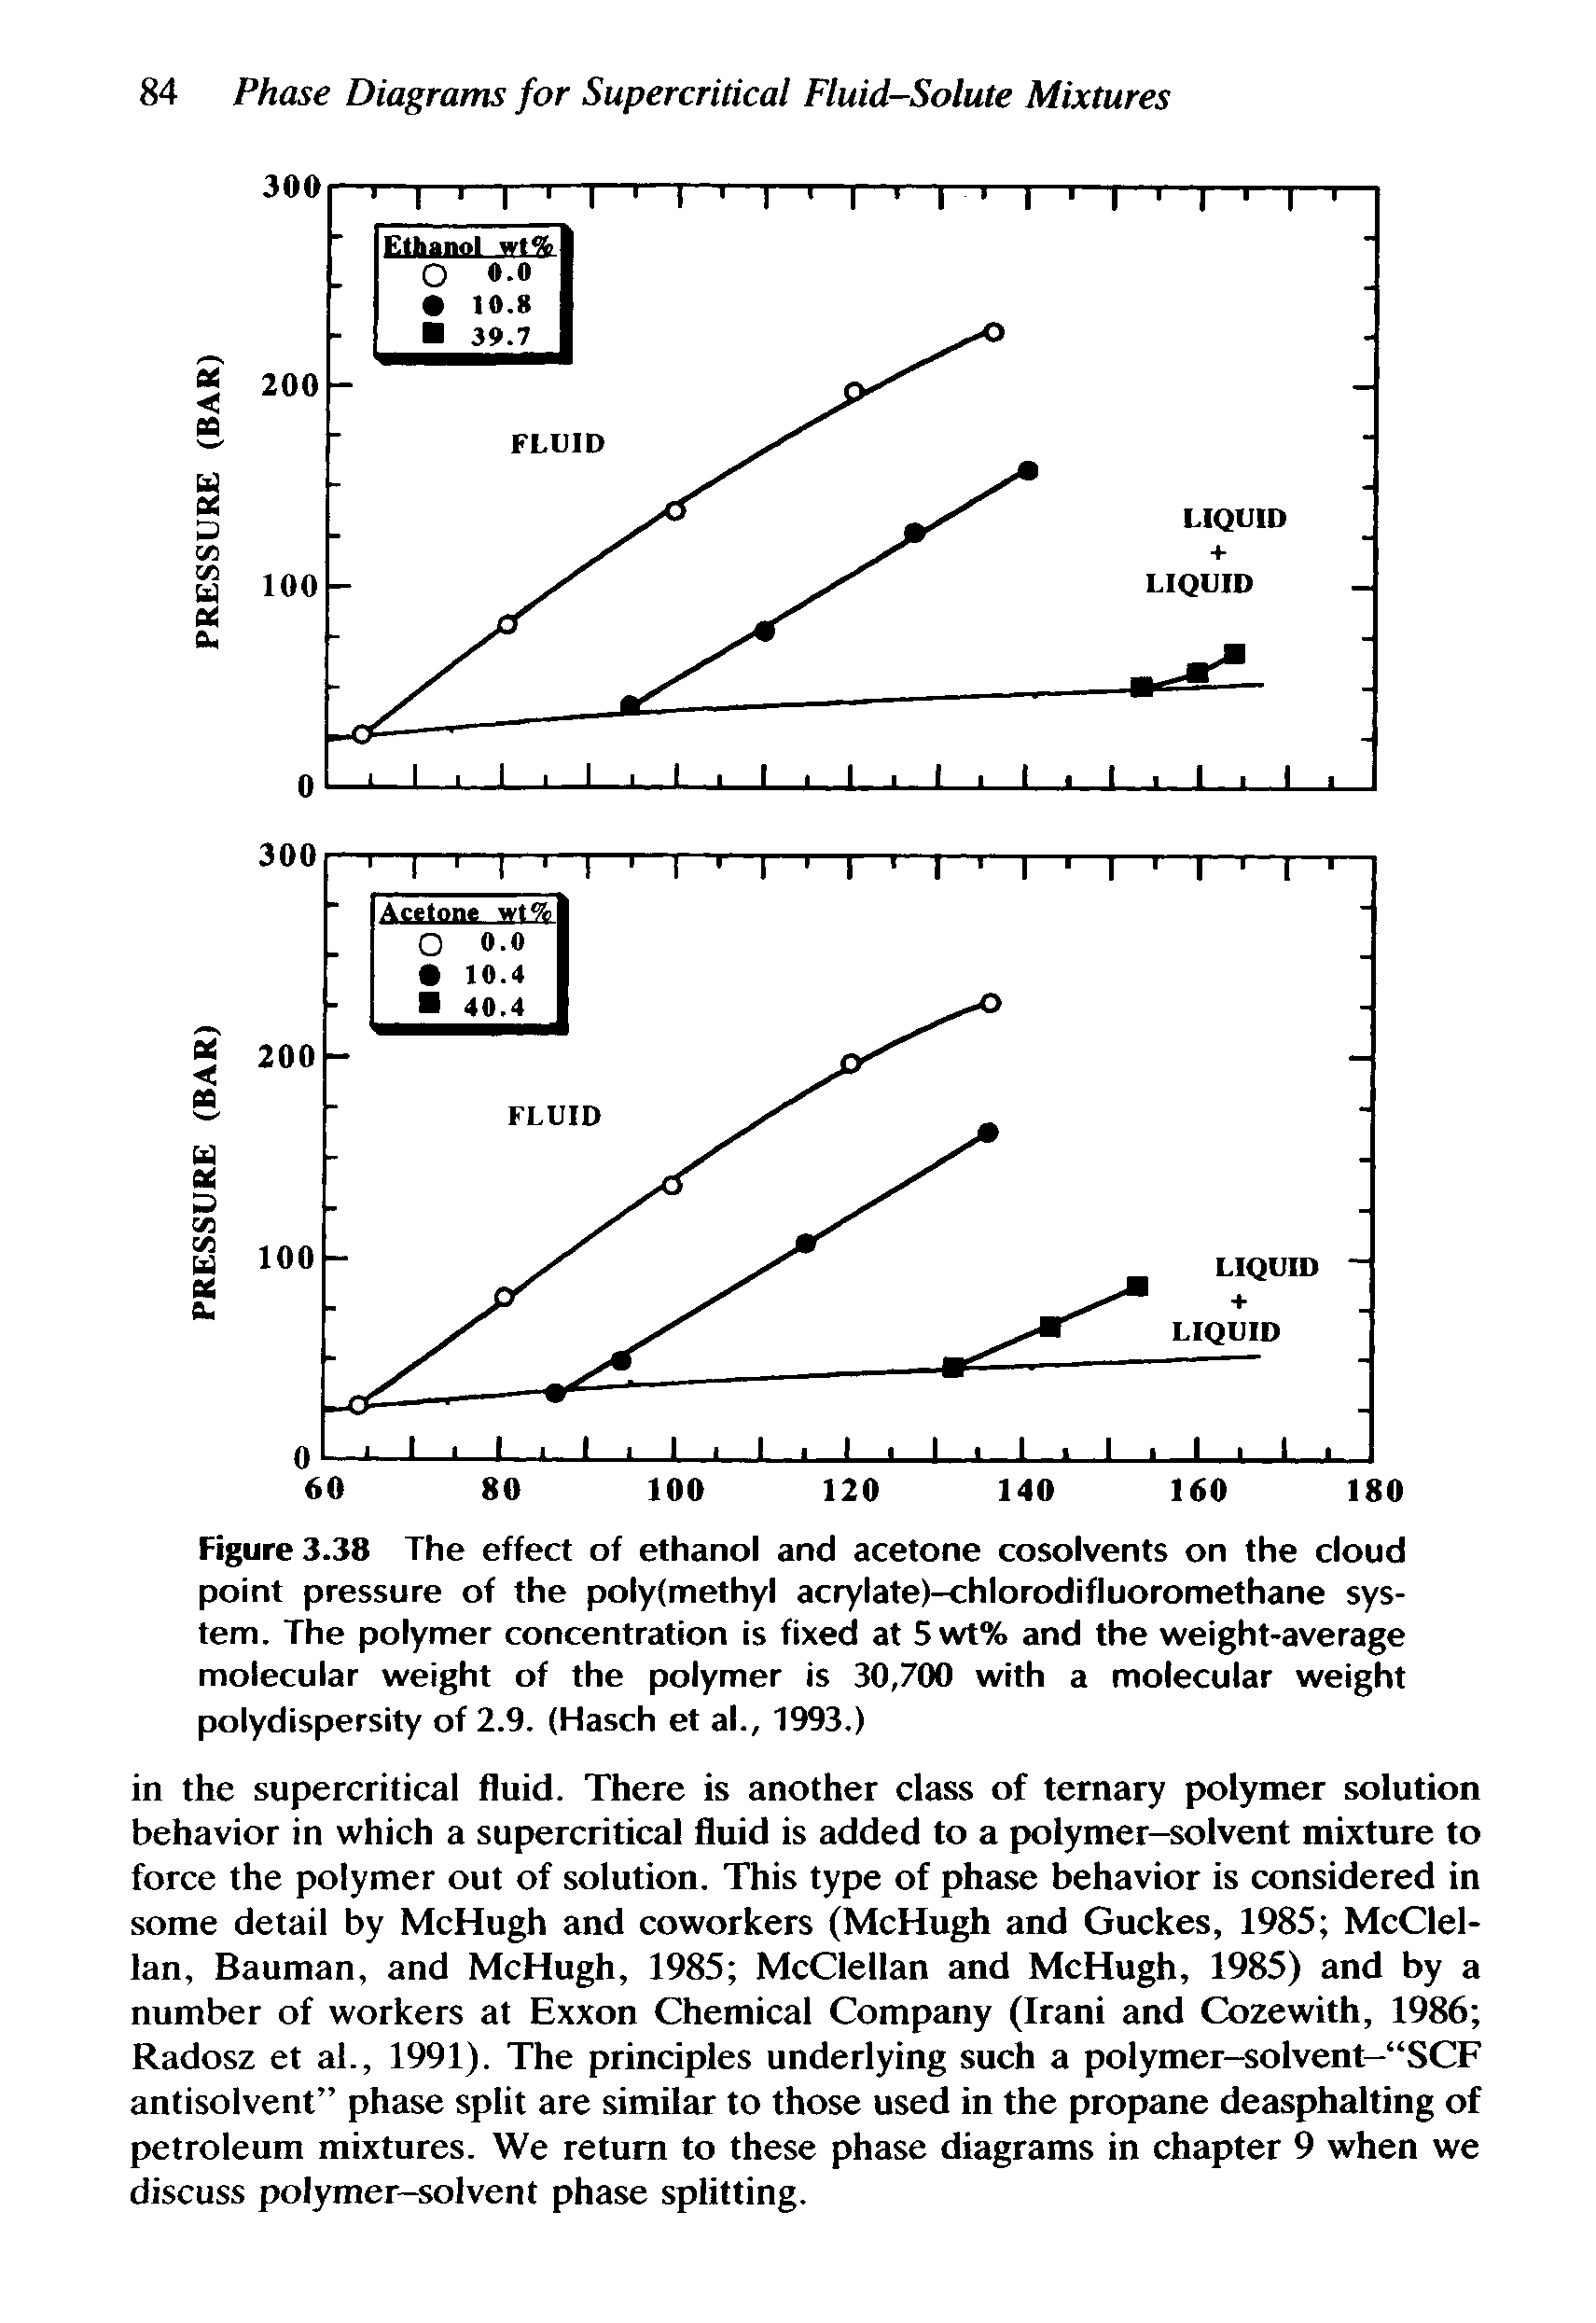 Figure 3.38 The effect of ethanol and acetone cosolvents on the cloud point pressure of the polyfmethyl acrylate)-chlorodifluoromethane system. The polymer concentration is fixed at 5wt% and the weight-average molecular weight of the polymer is 30,700 with a molecular weight polydispersity of 2.9. (Hasch et al., 1993.)...